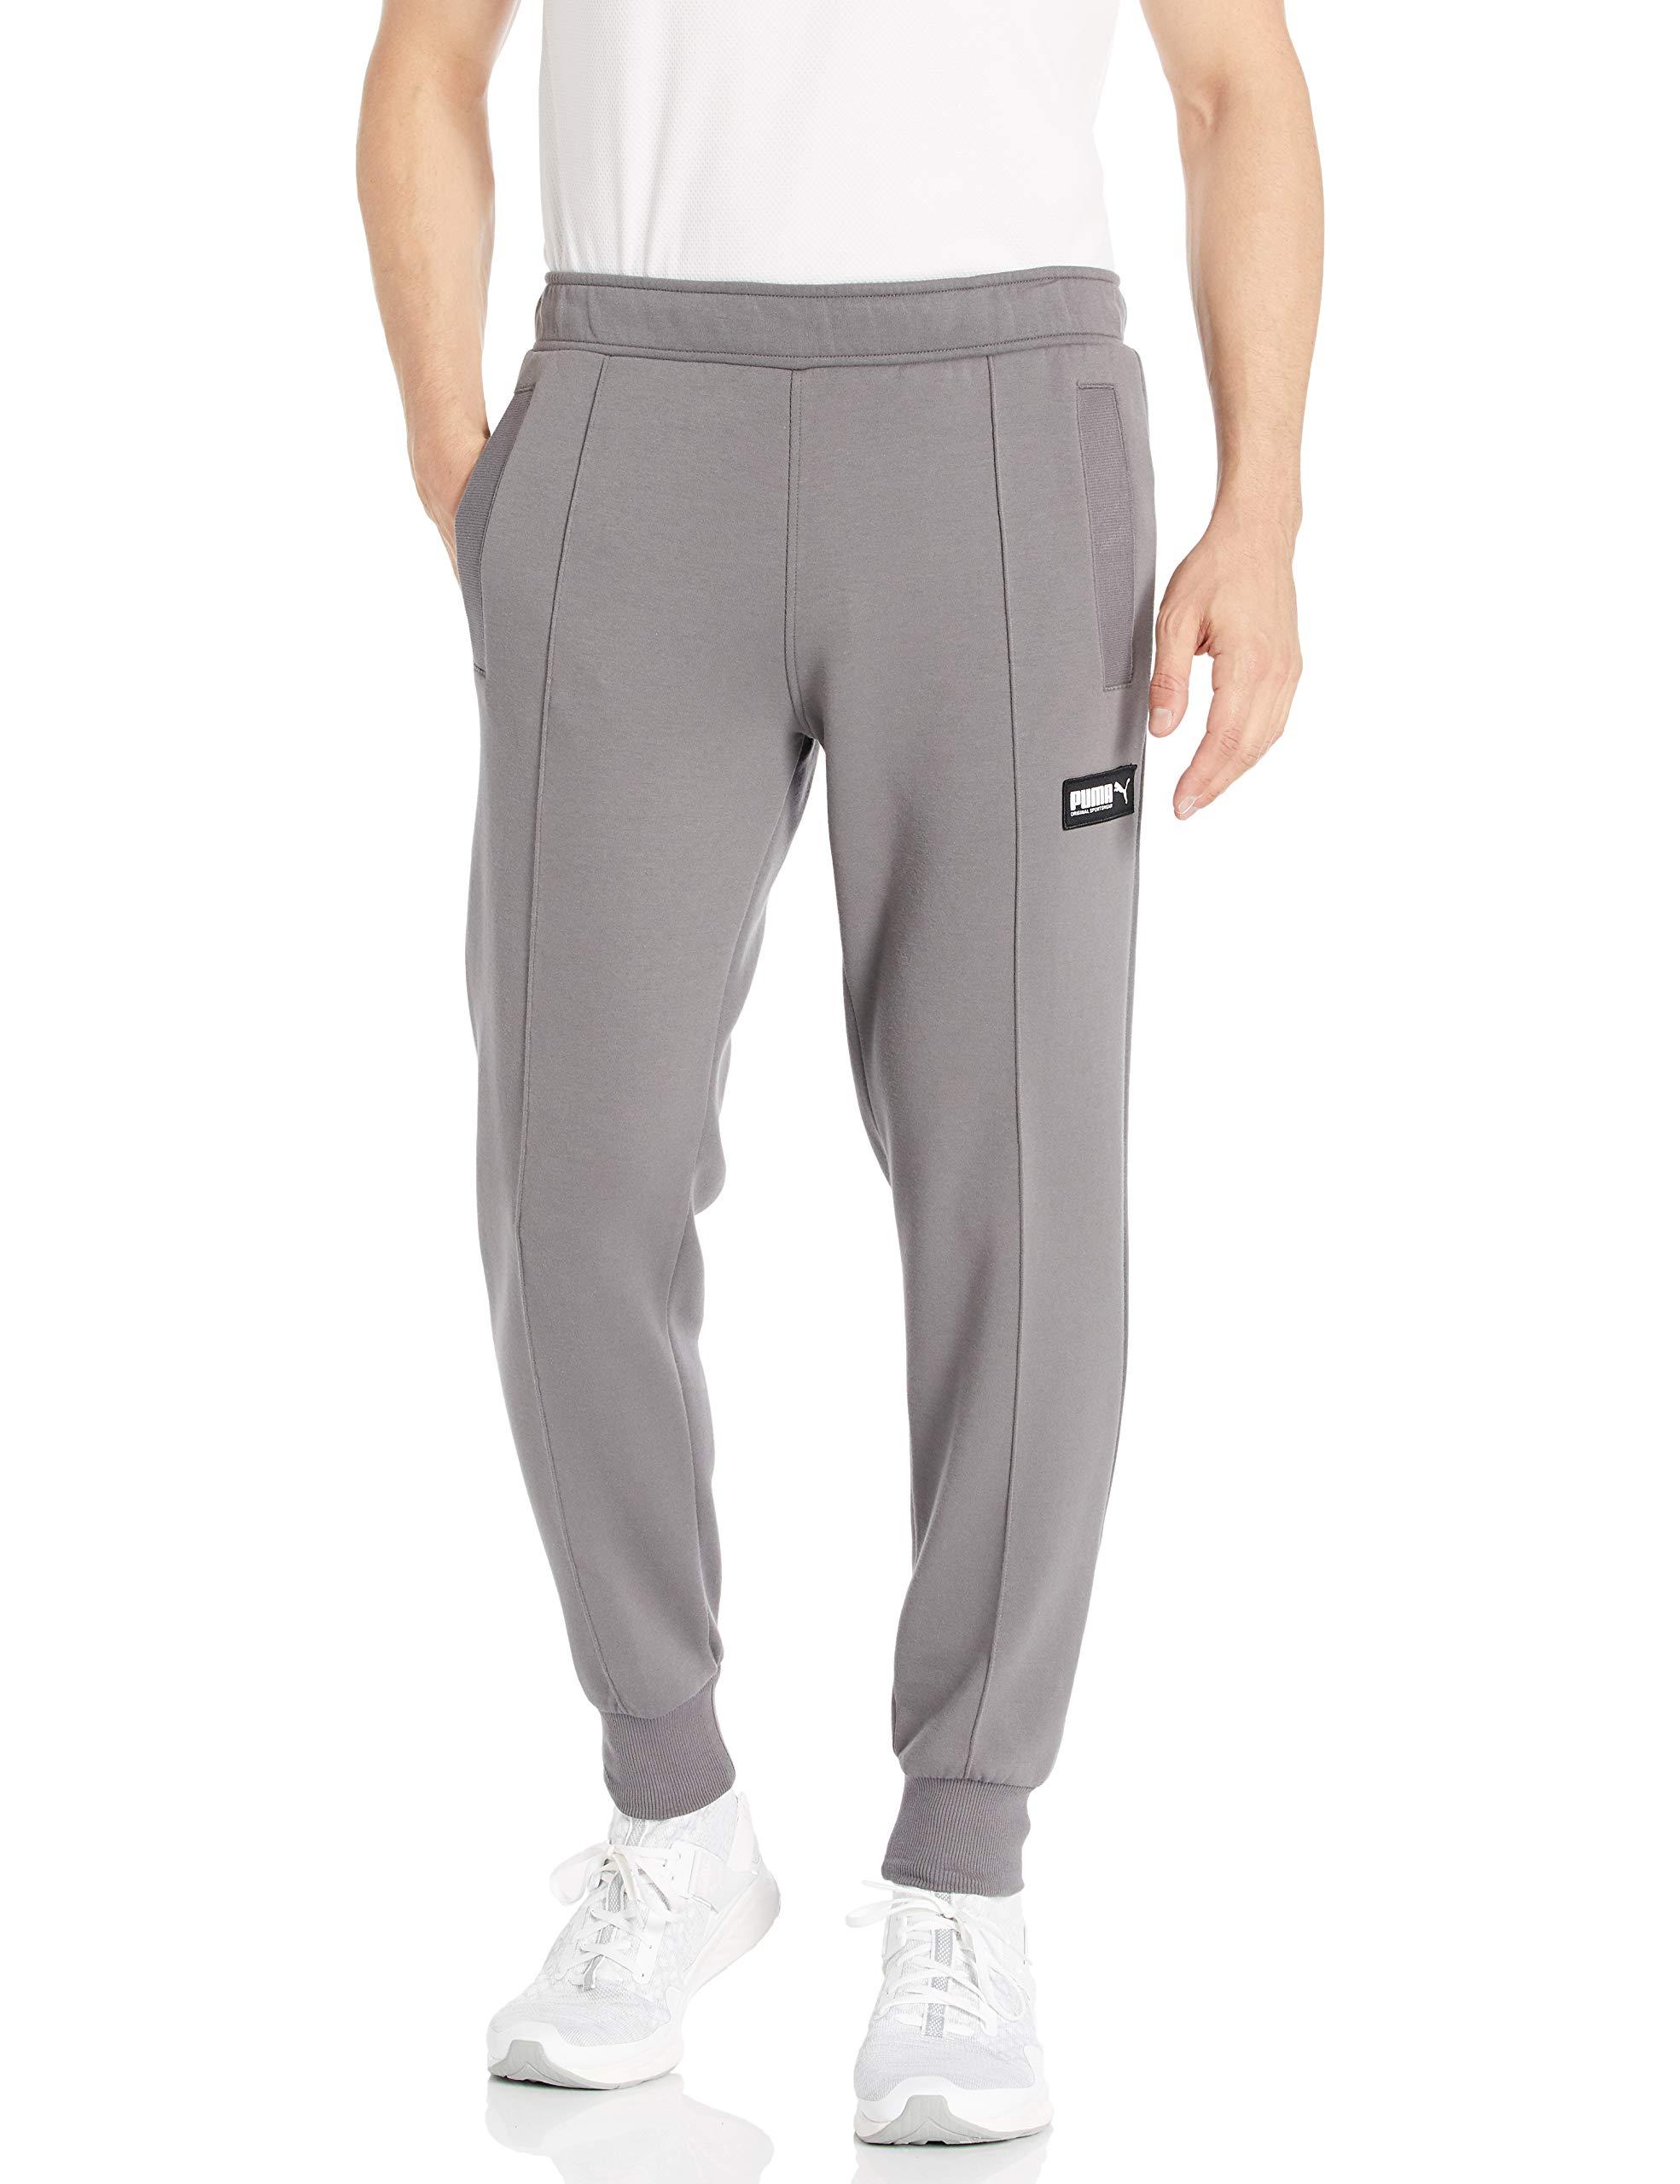 Cotton Fusion Pants in Gray for Men - Lyst